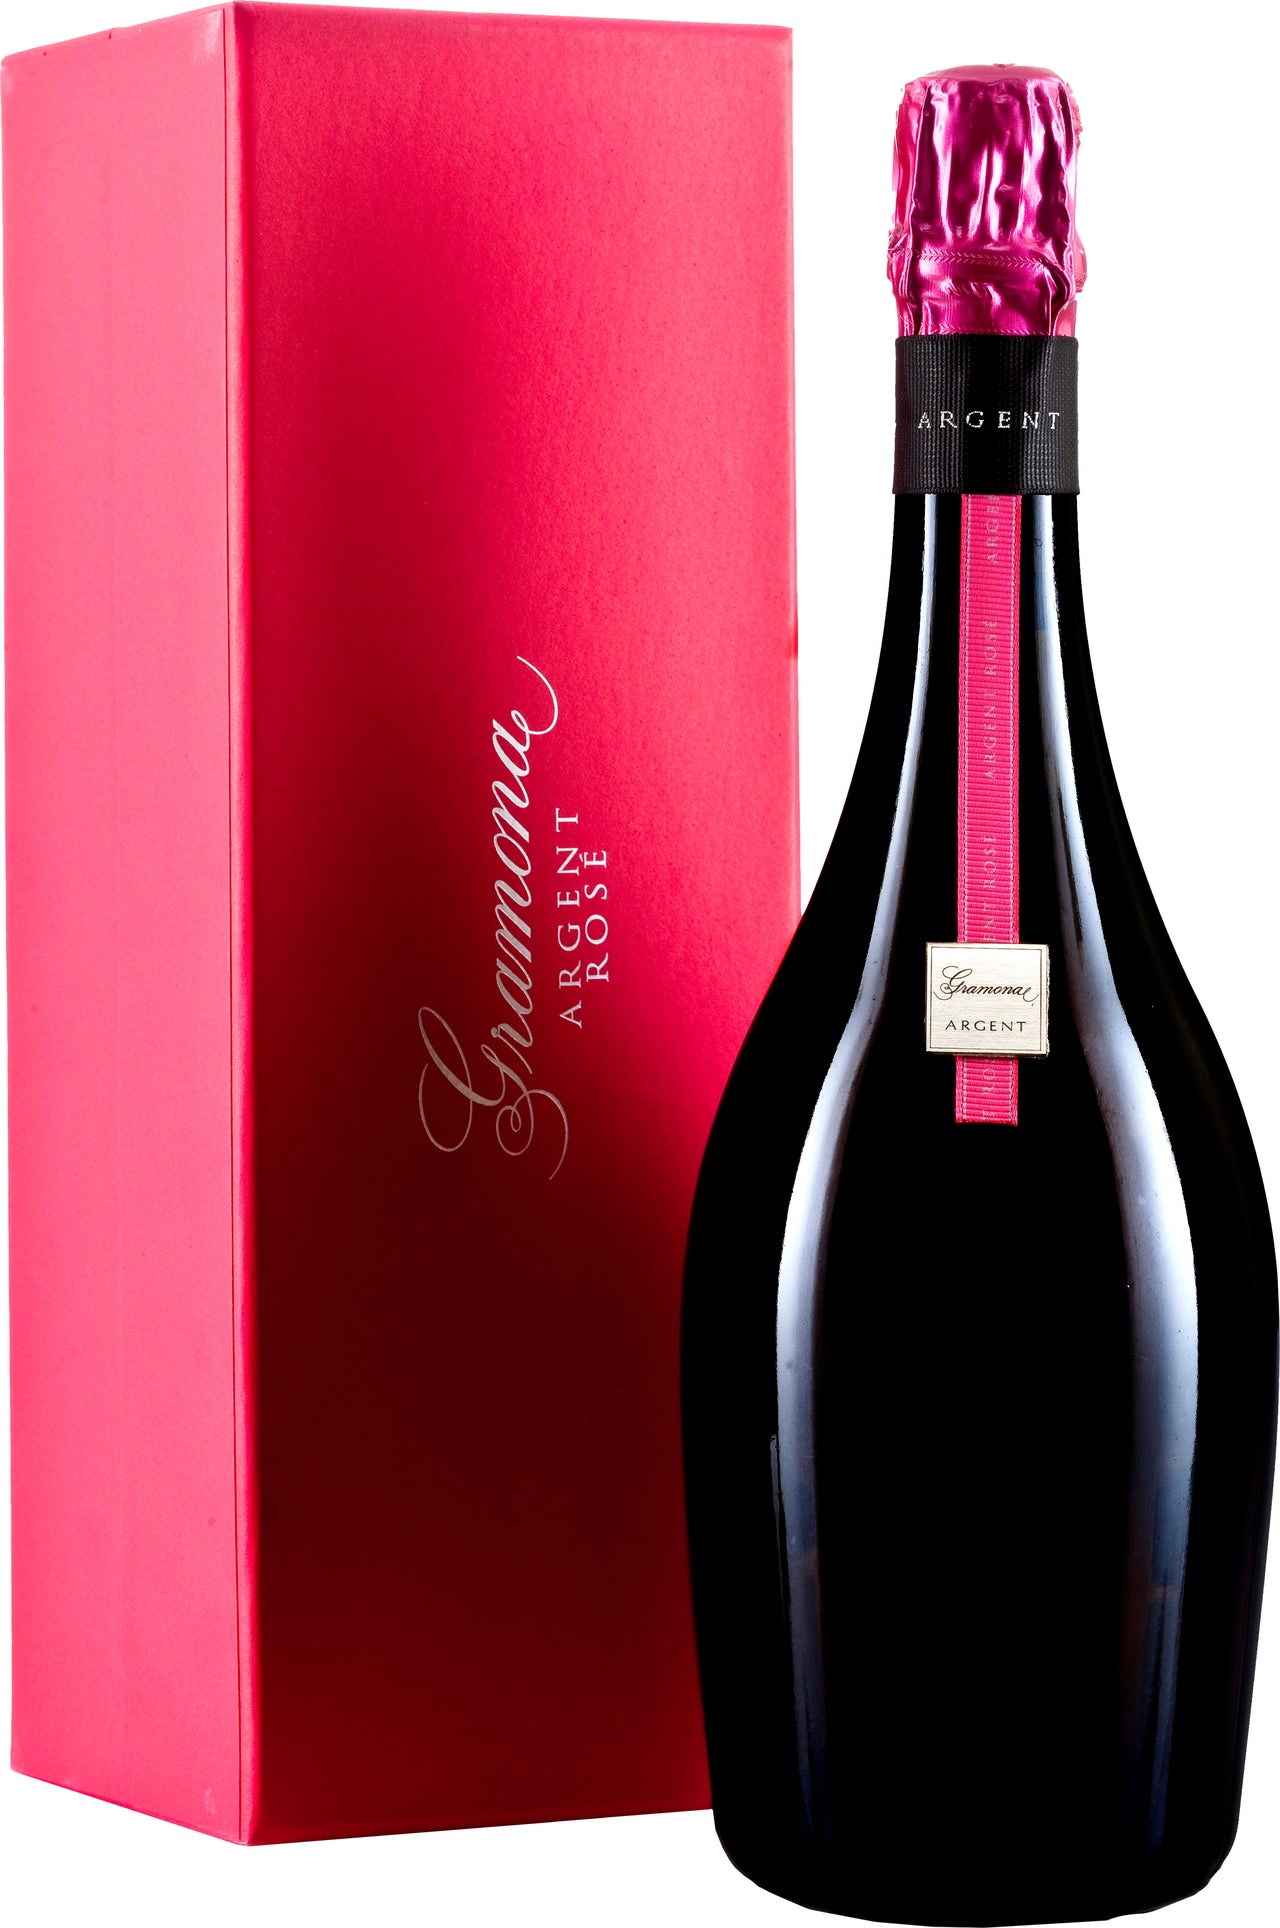 Gramona Argent Rose Brut Nature Organic 2020 75cl - Buy Gramona Wines from GREAT WINES DIRECT wine shop